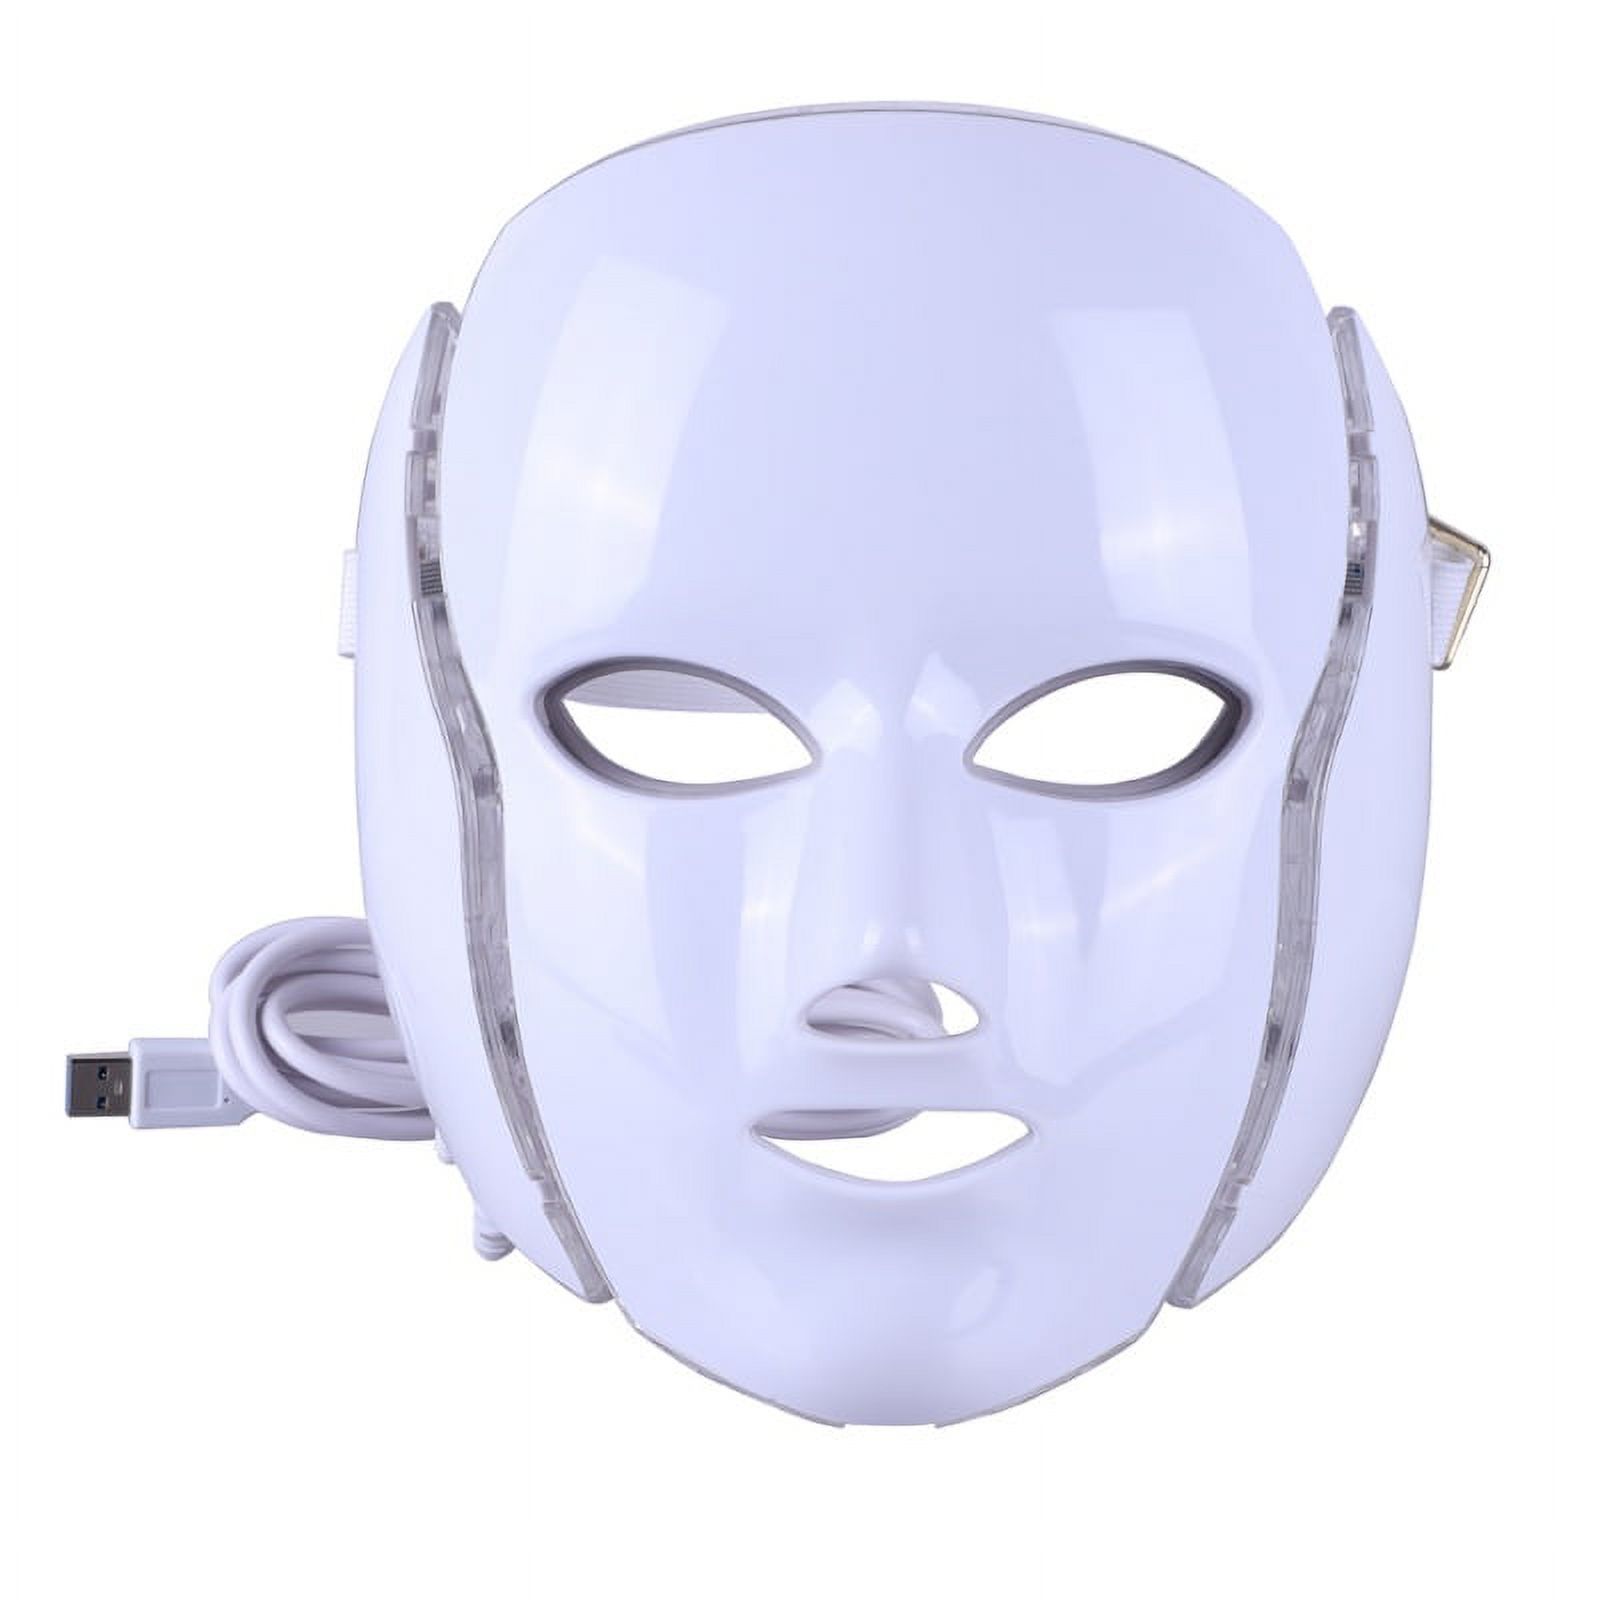 LED Light Therapy Mask-with Clinically Proven Blue & Red Light Treatment Acne Photon Mask,Led Face Mask for Anti-aging, Brightening, Improve Wrinkles,Tightening and Smoother Skin - image 1 of 5